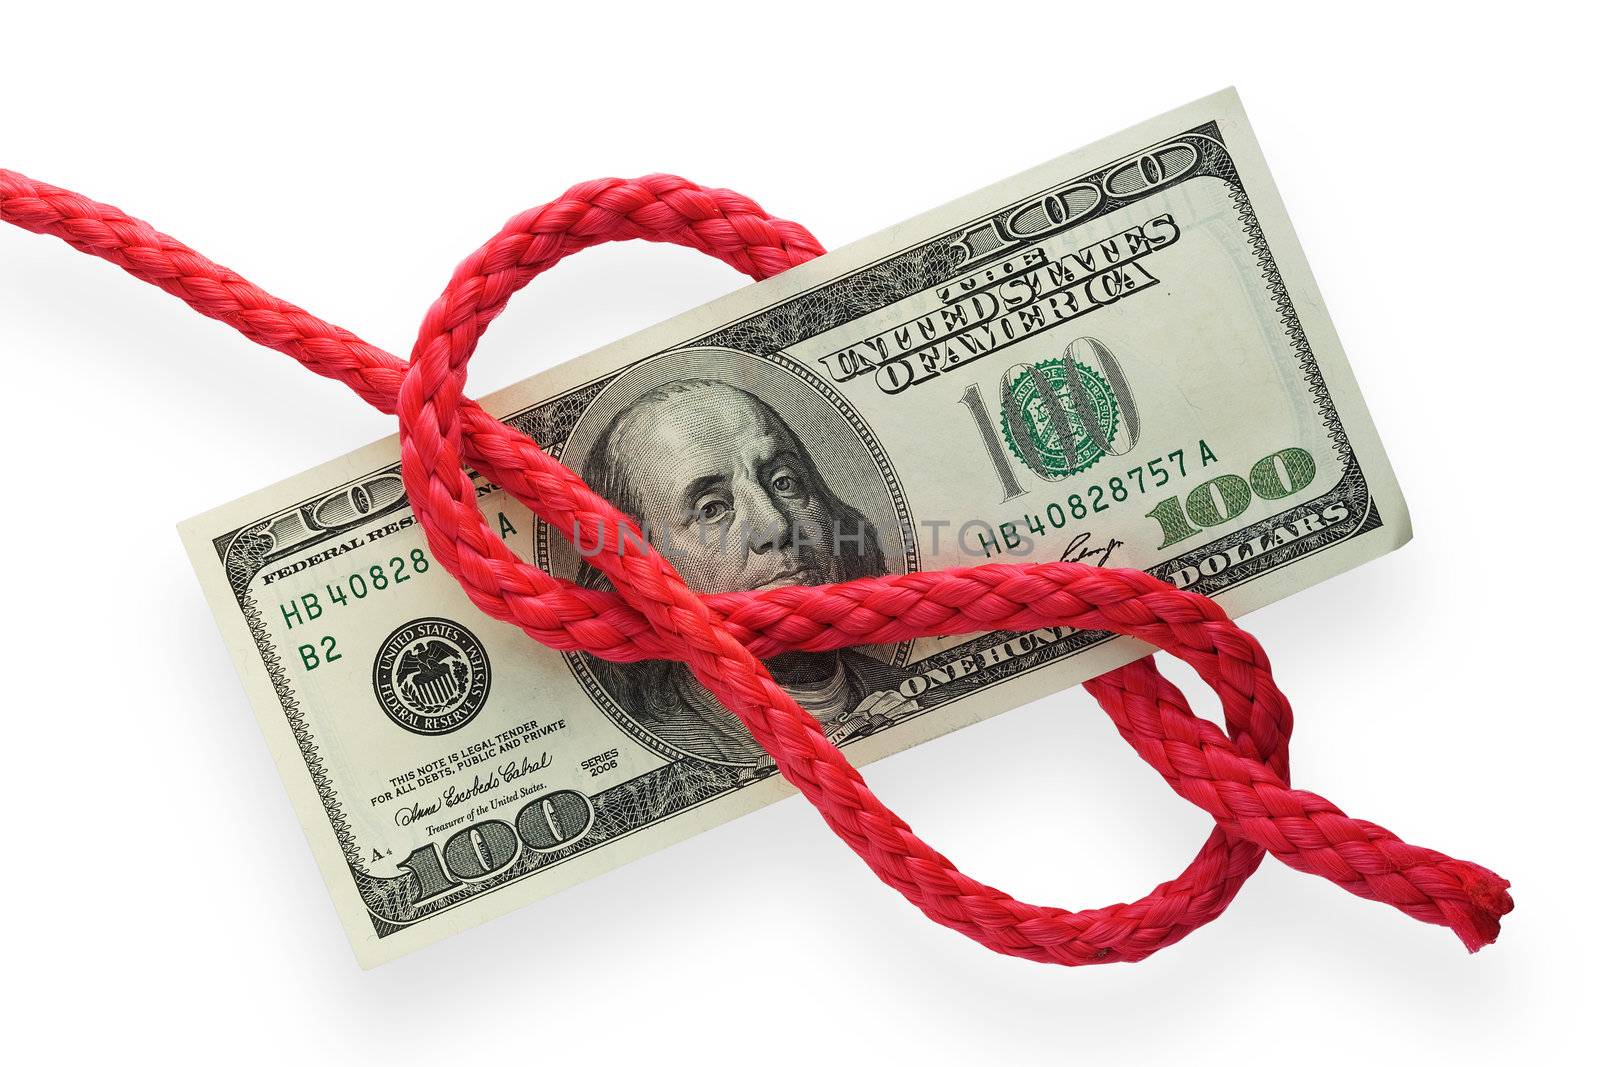 The red cord with figure-eight knot on a banknote. Isolated on white. Conception of risk or difficulty.
